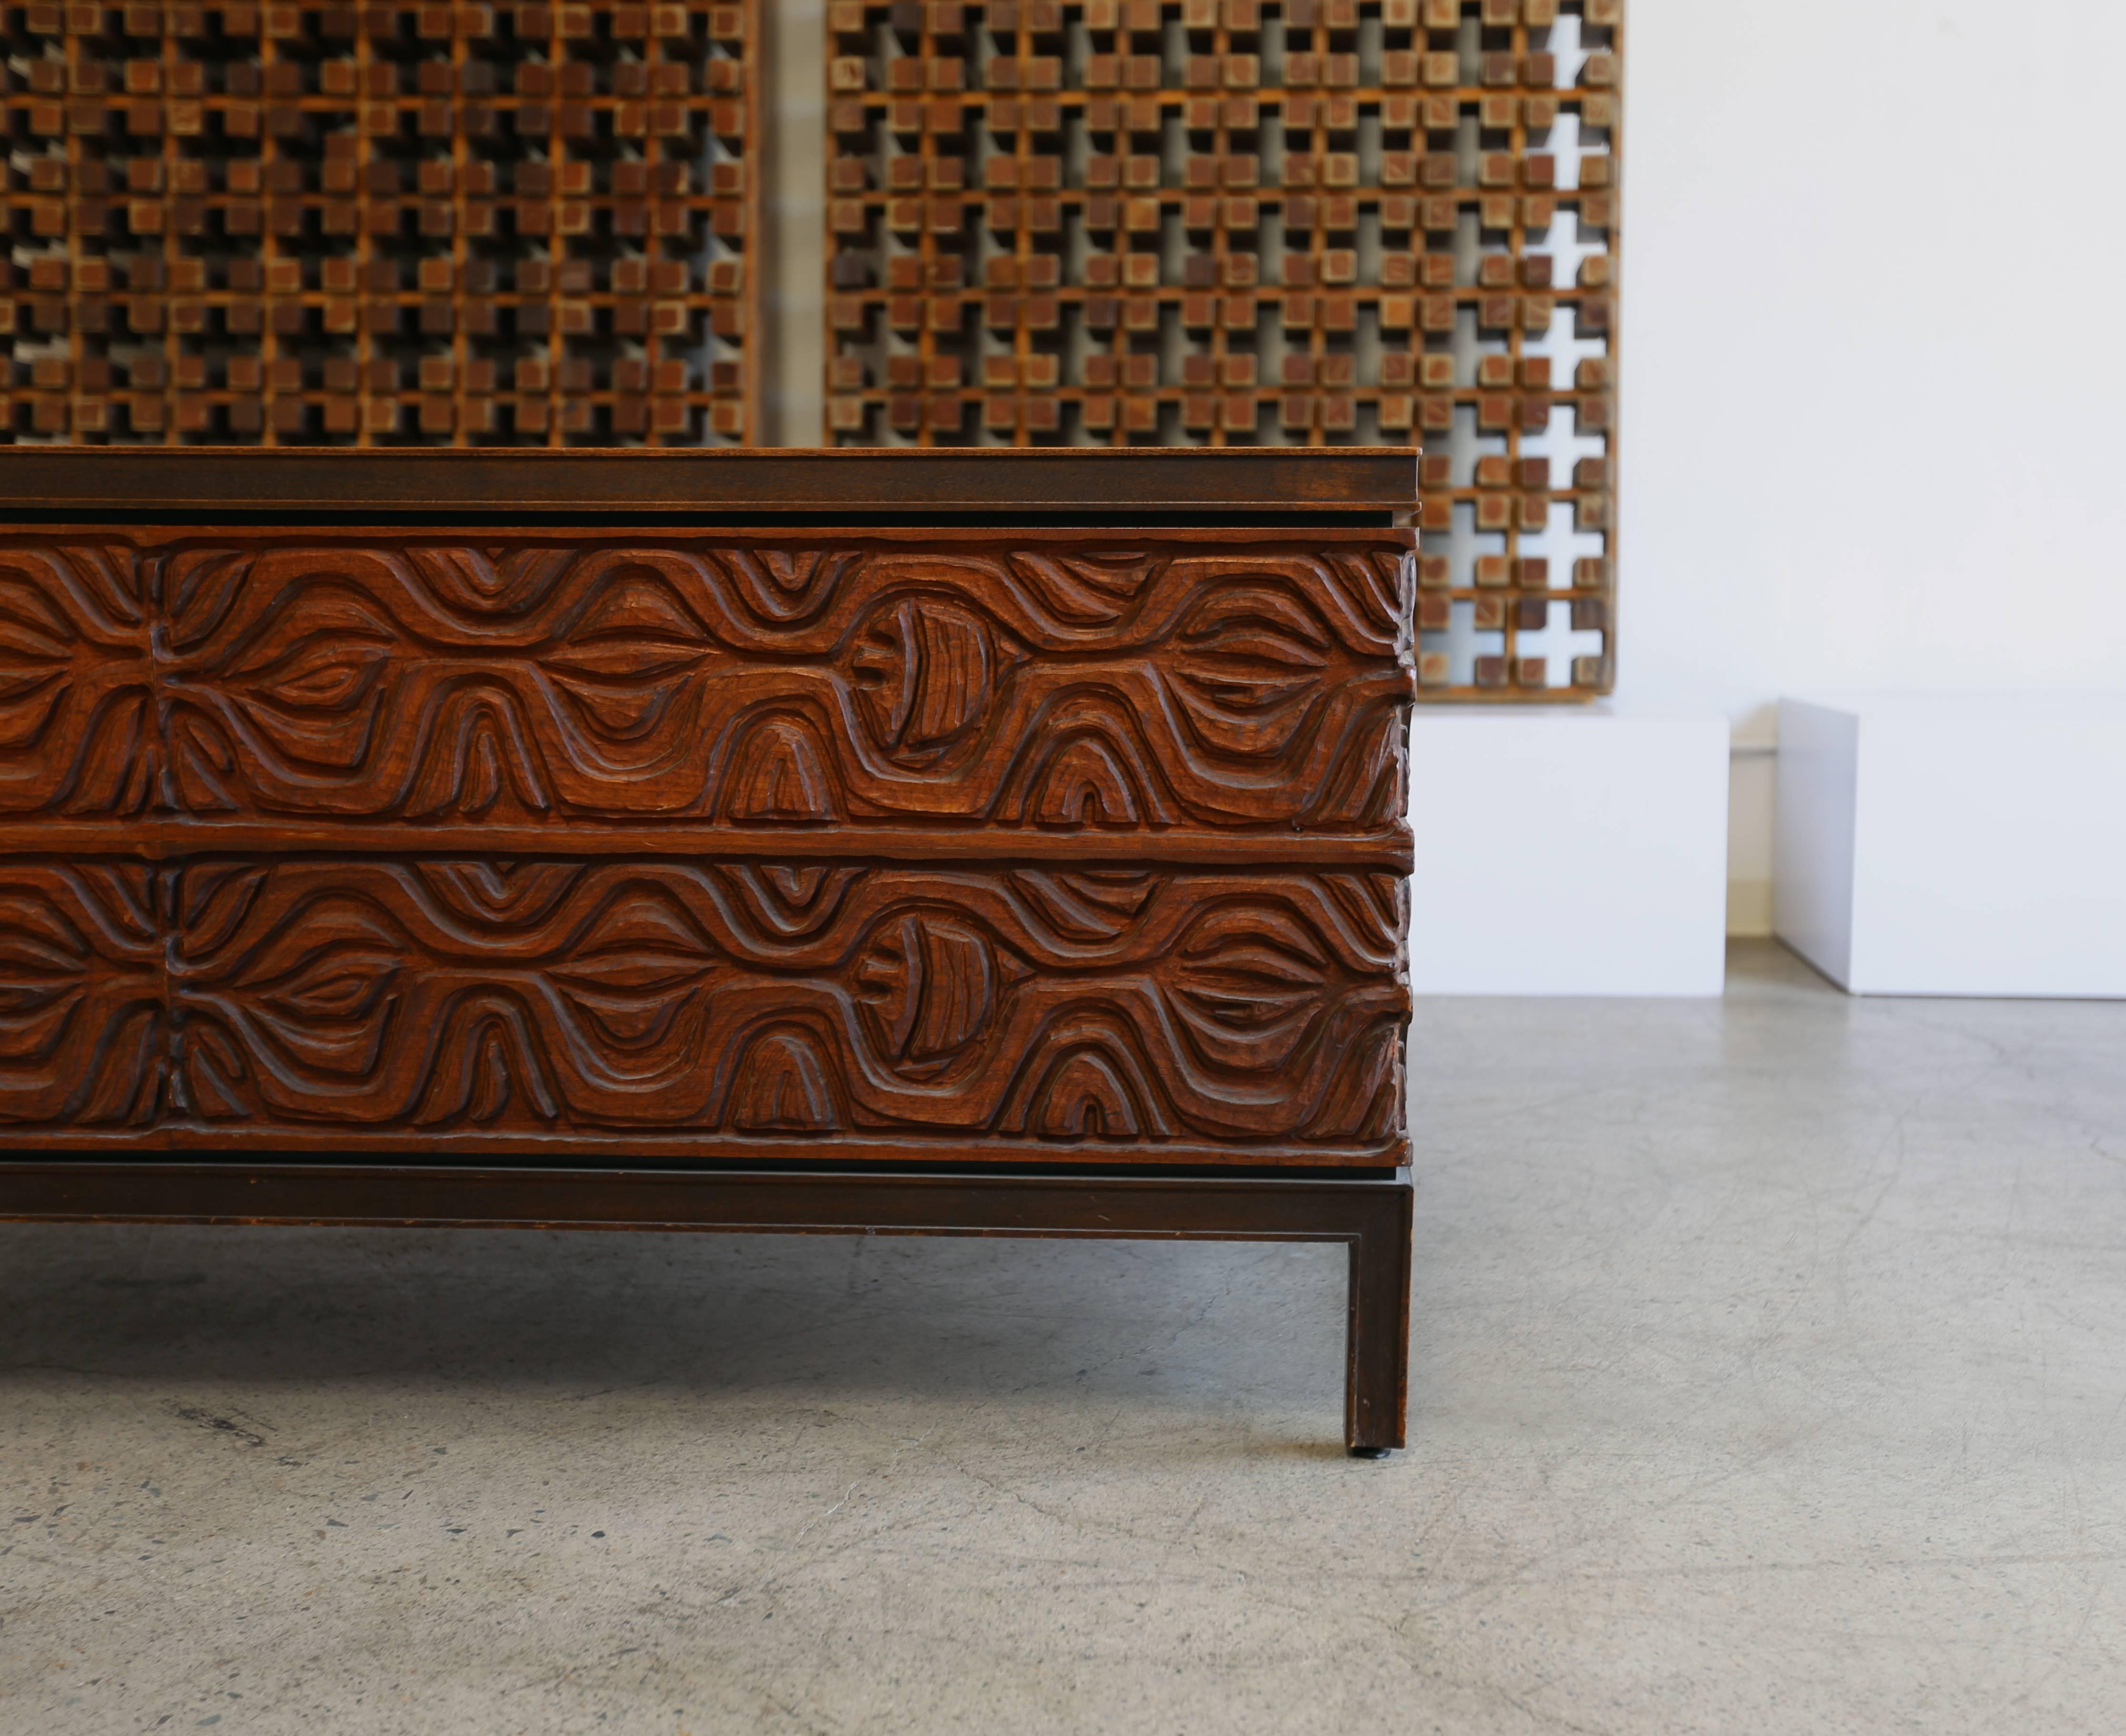 Sculptural walnut and Panelcarve desk by Murray Feldman for A. E. Furniture. Similar example on page 66 of California design or nine.